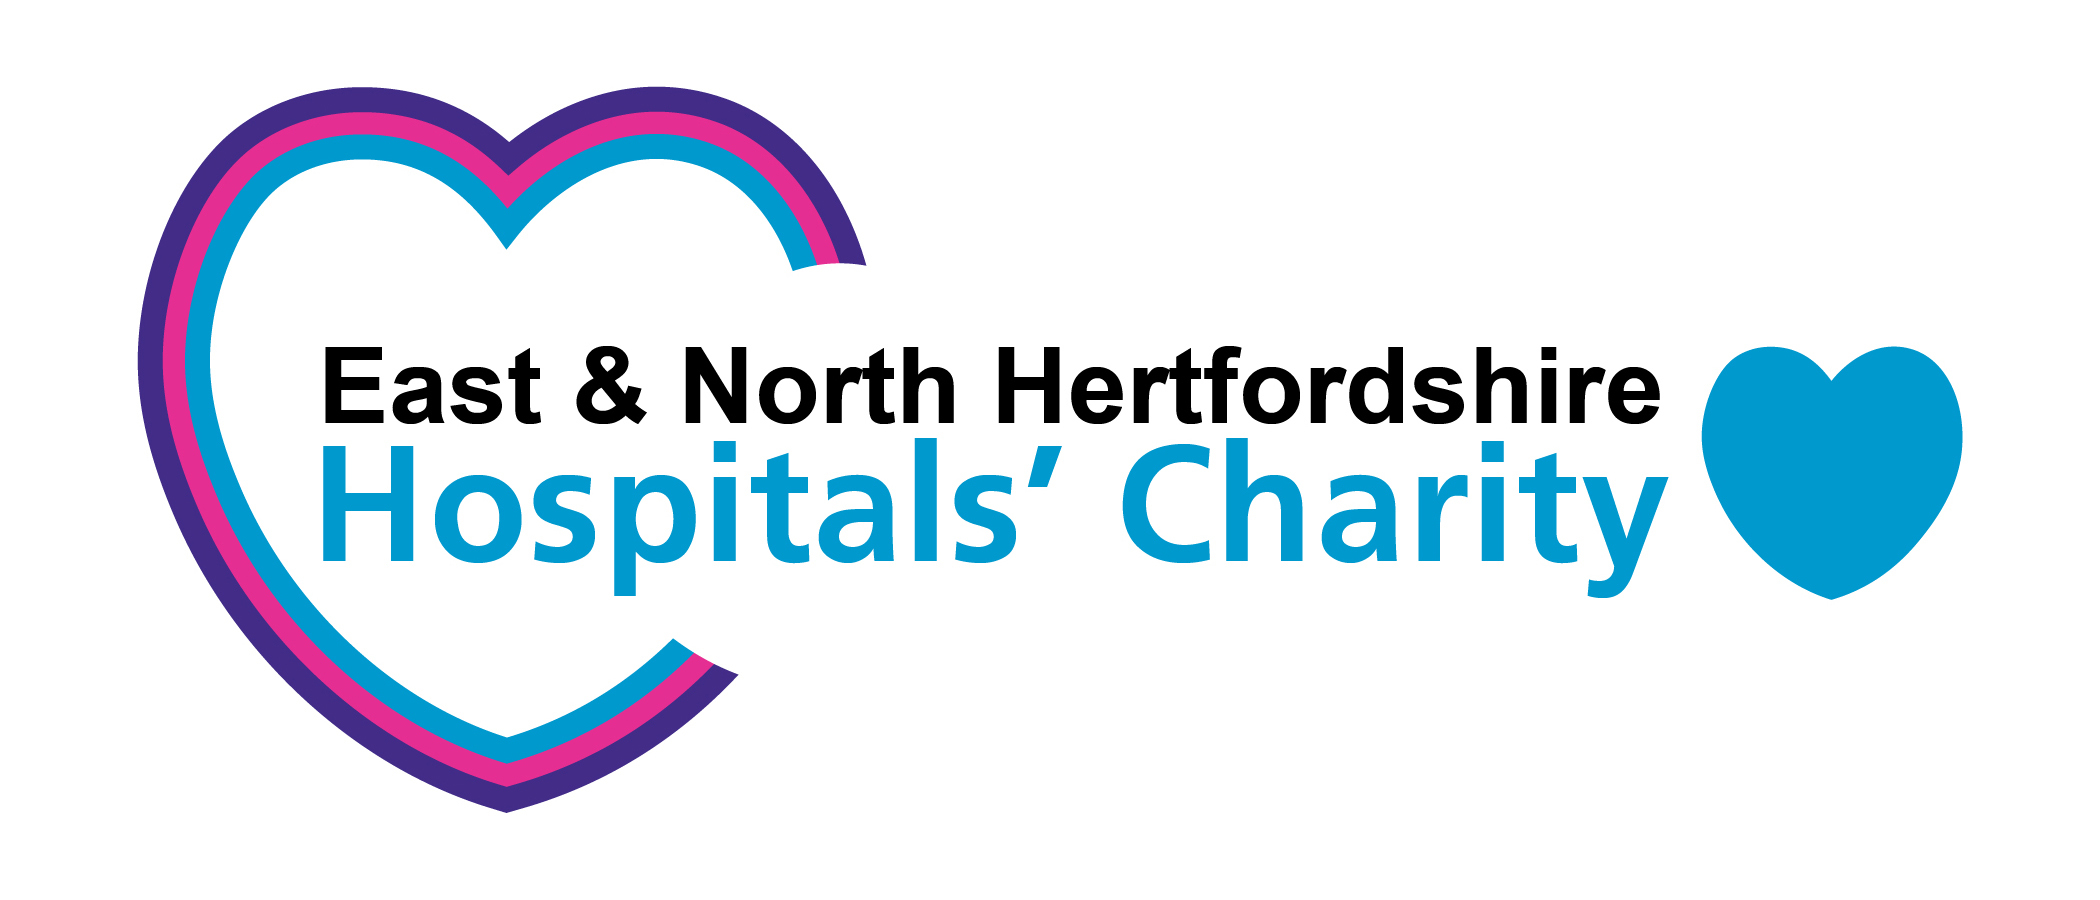 East & North Hertfordshire Hospitals' Charity